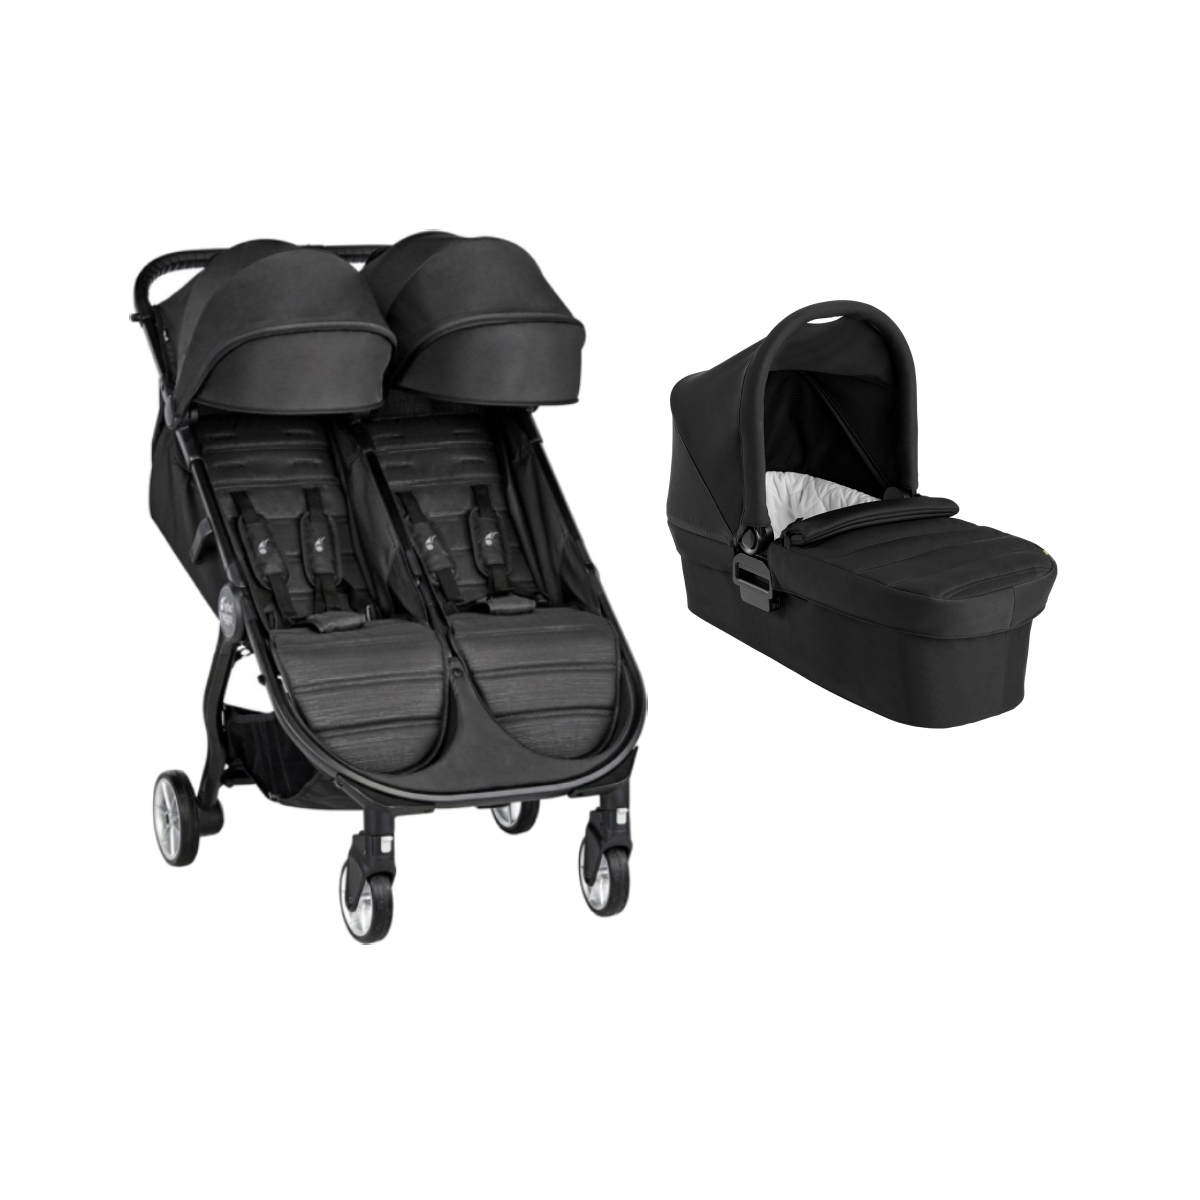 Baby Jogger City Tour 2 Double 2 in 1 Pram System Bundle